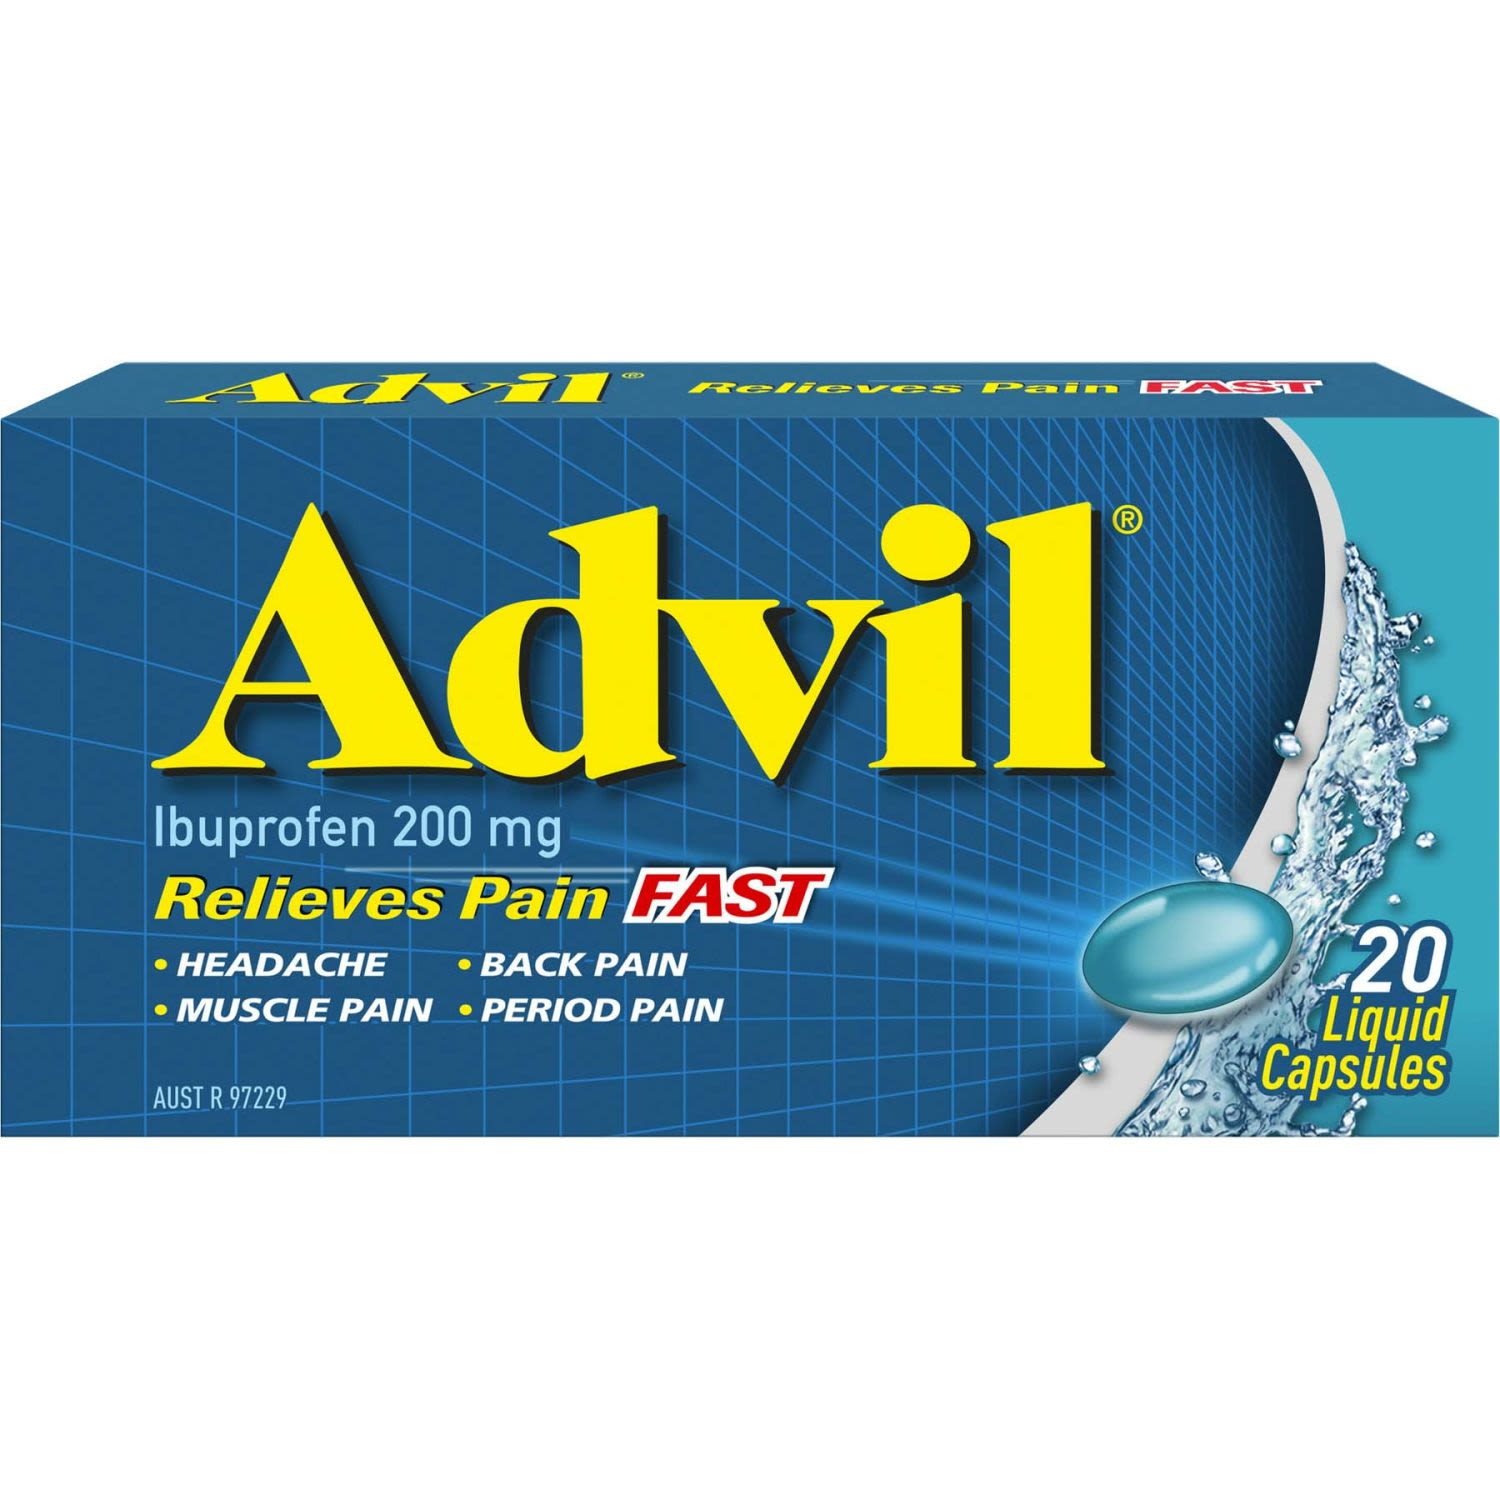 Advil provides temporary relief of pain and discomfort from:
- Headache
- Back Pain
- Muscle Pain
- Period Pain
- Dental Pain
- Arthritis Pain
- Sore Throat Pain
- Cold & Flu

Advil reduces fever.<br /> <br />